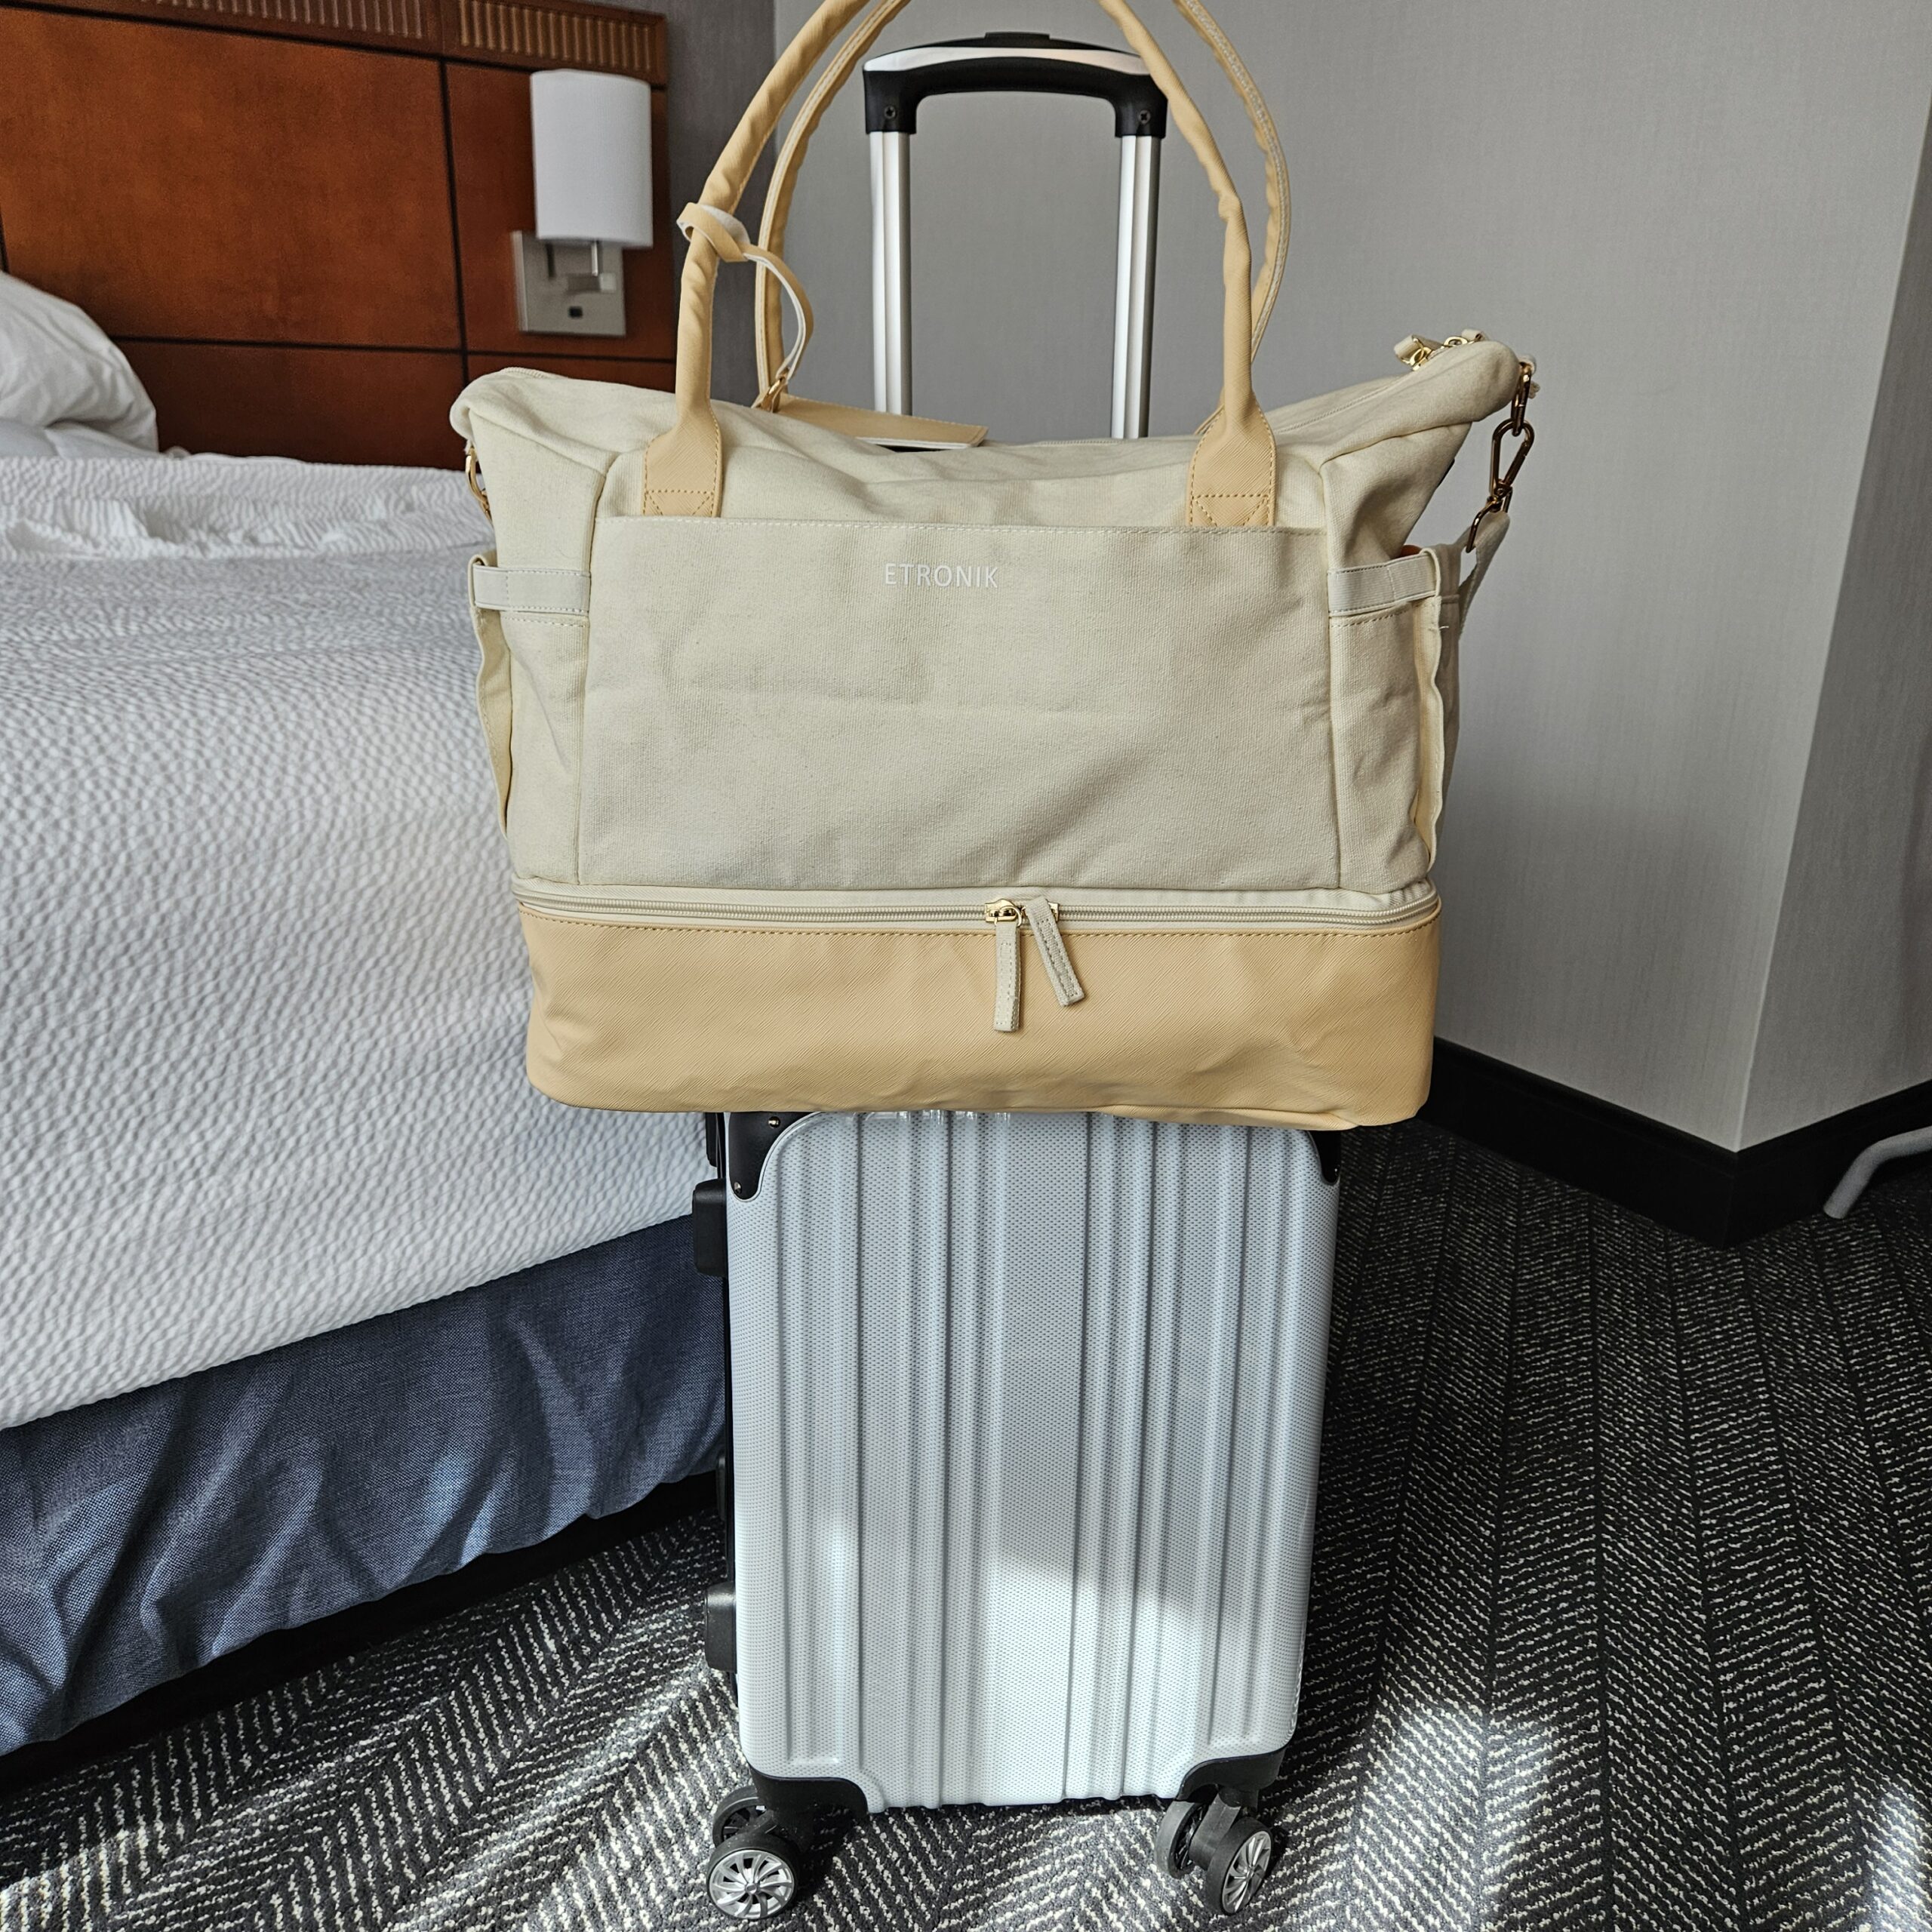 You are currently viewing Travel Favorites – Quick Trip Carry On Luggage